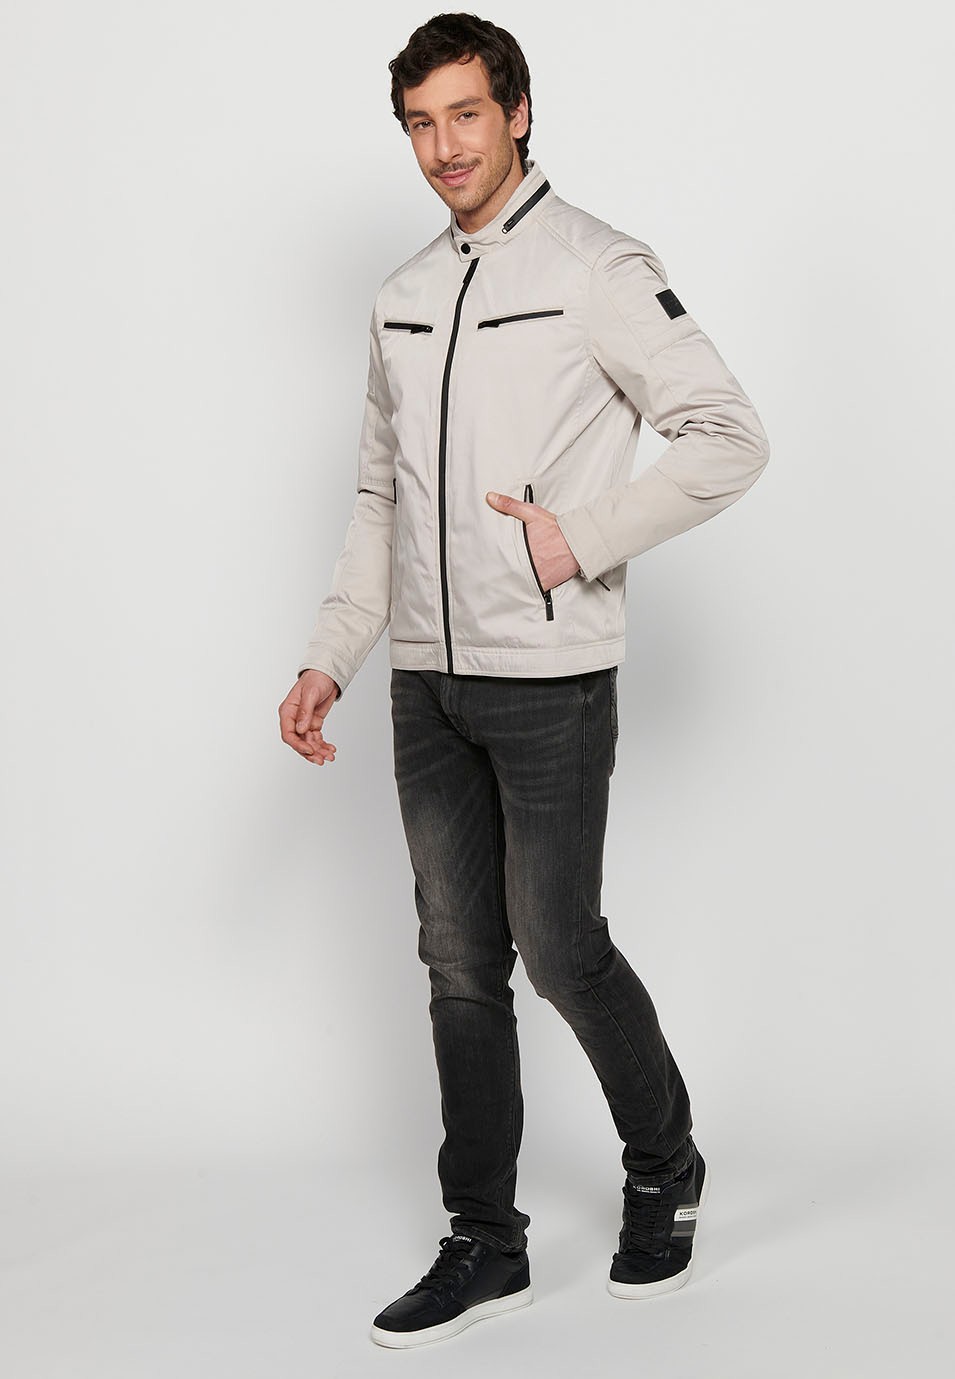 Beige Long-sleeved Jacket with Round Neck and Front Zipper Closure for Men 2